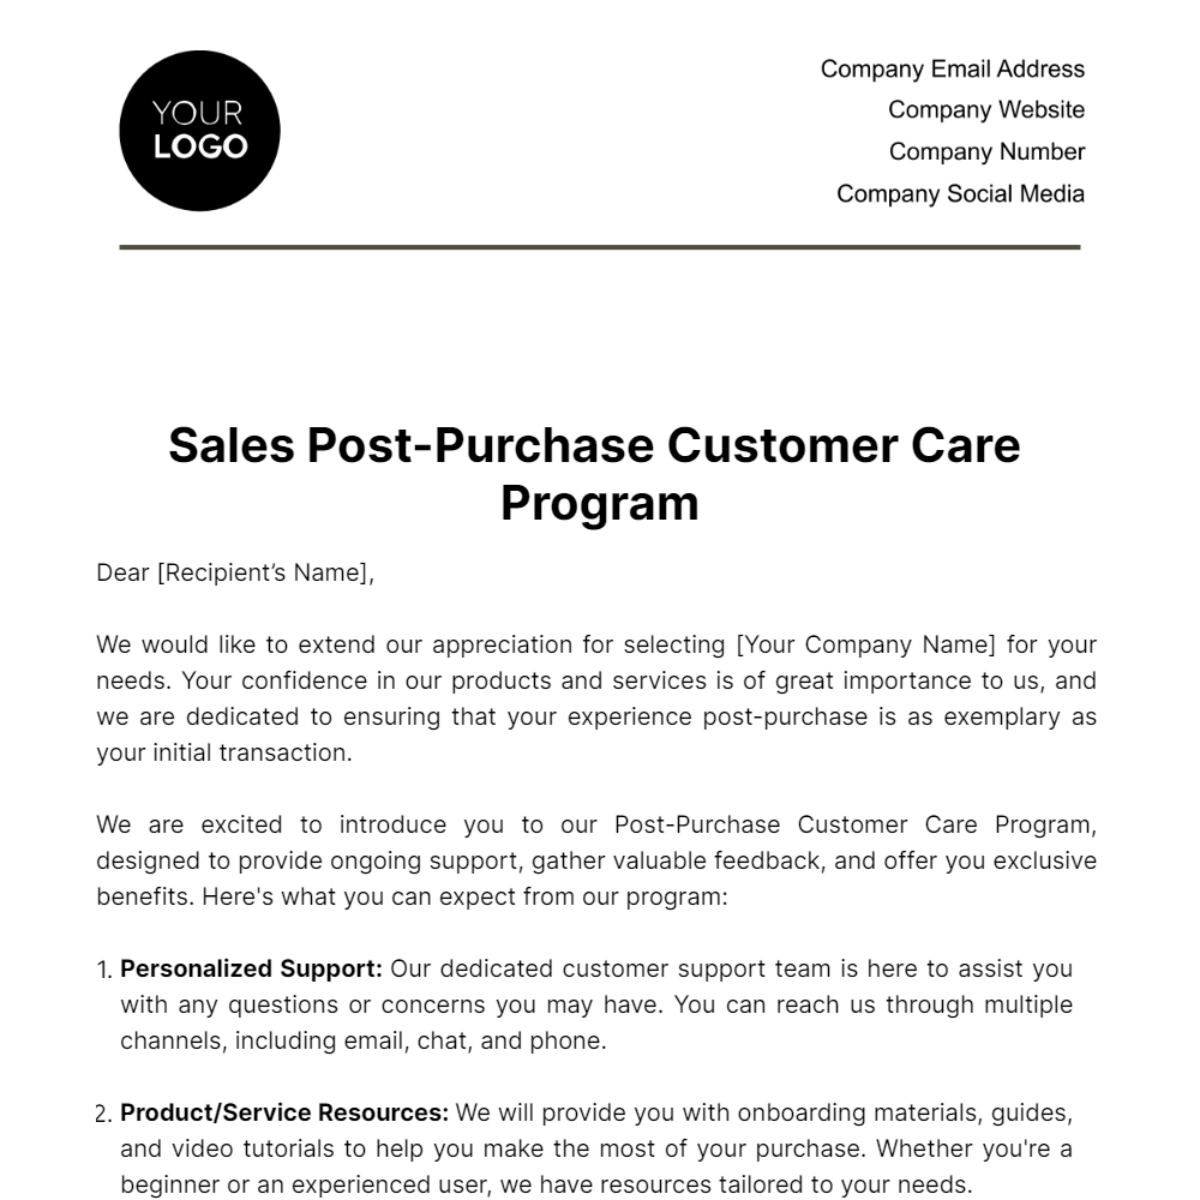 Free Sales Post-Purchase Customer Care Program Template